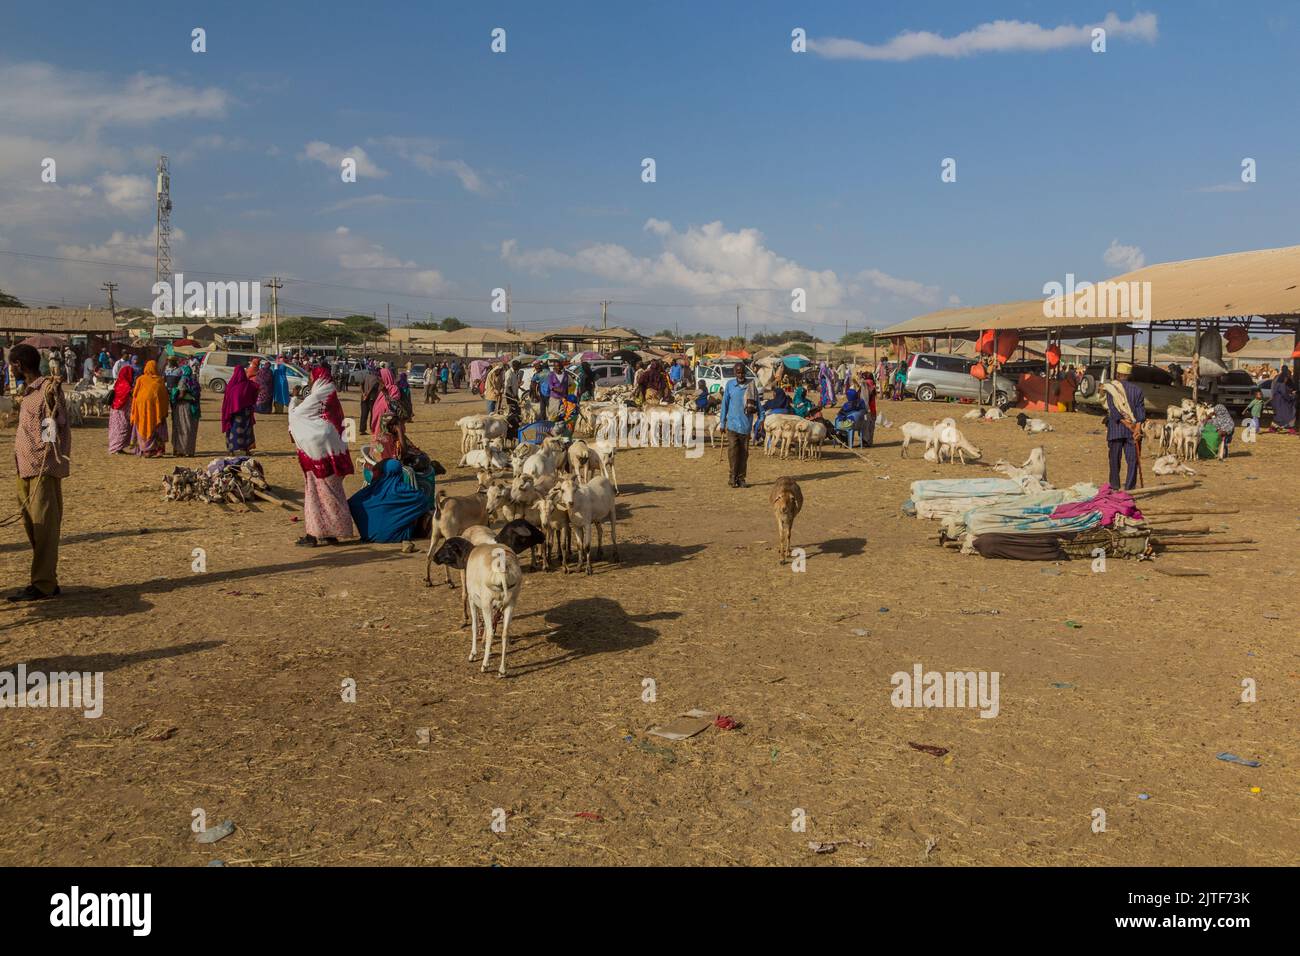 HARGEISA, SOMALILAND - APRIL 15, 2019: View of the goat market in Hargeisa, capital of Somaliland Stock Photo